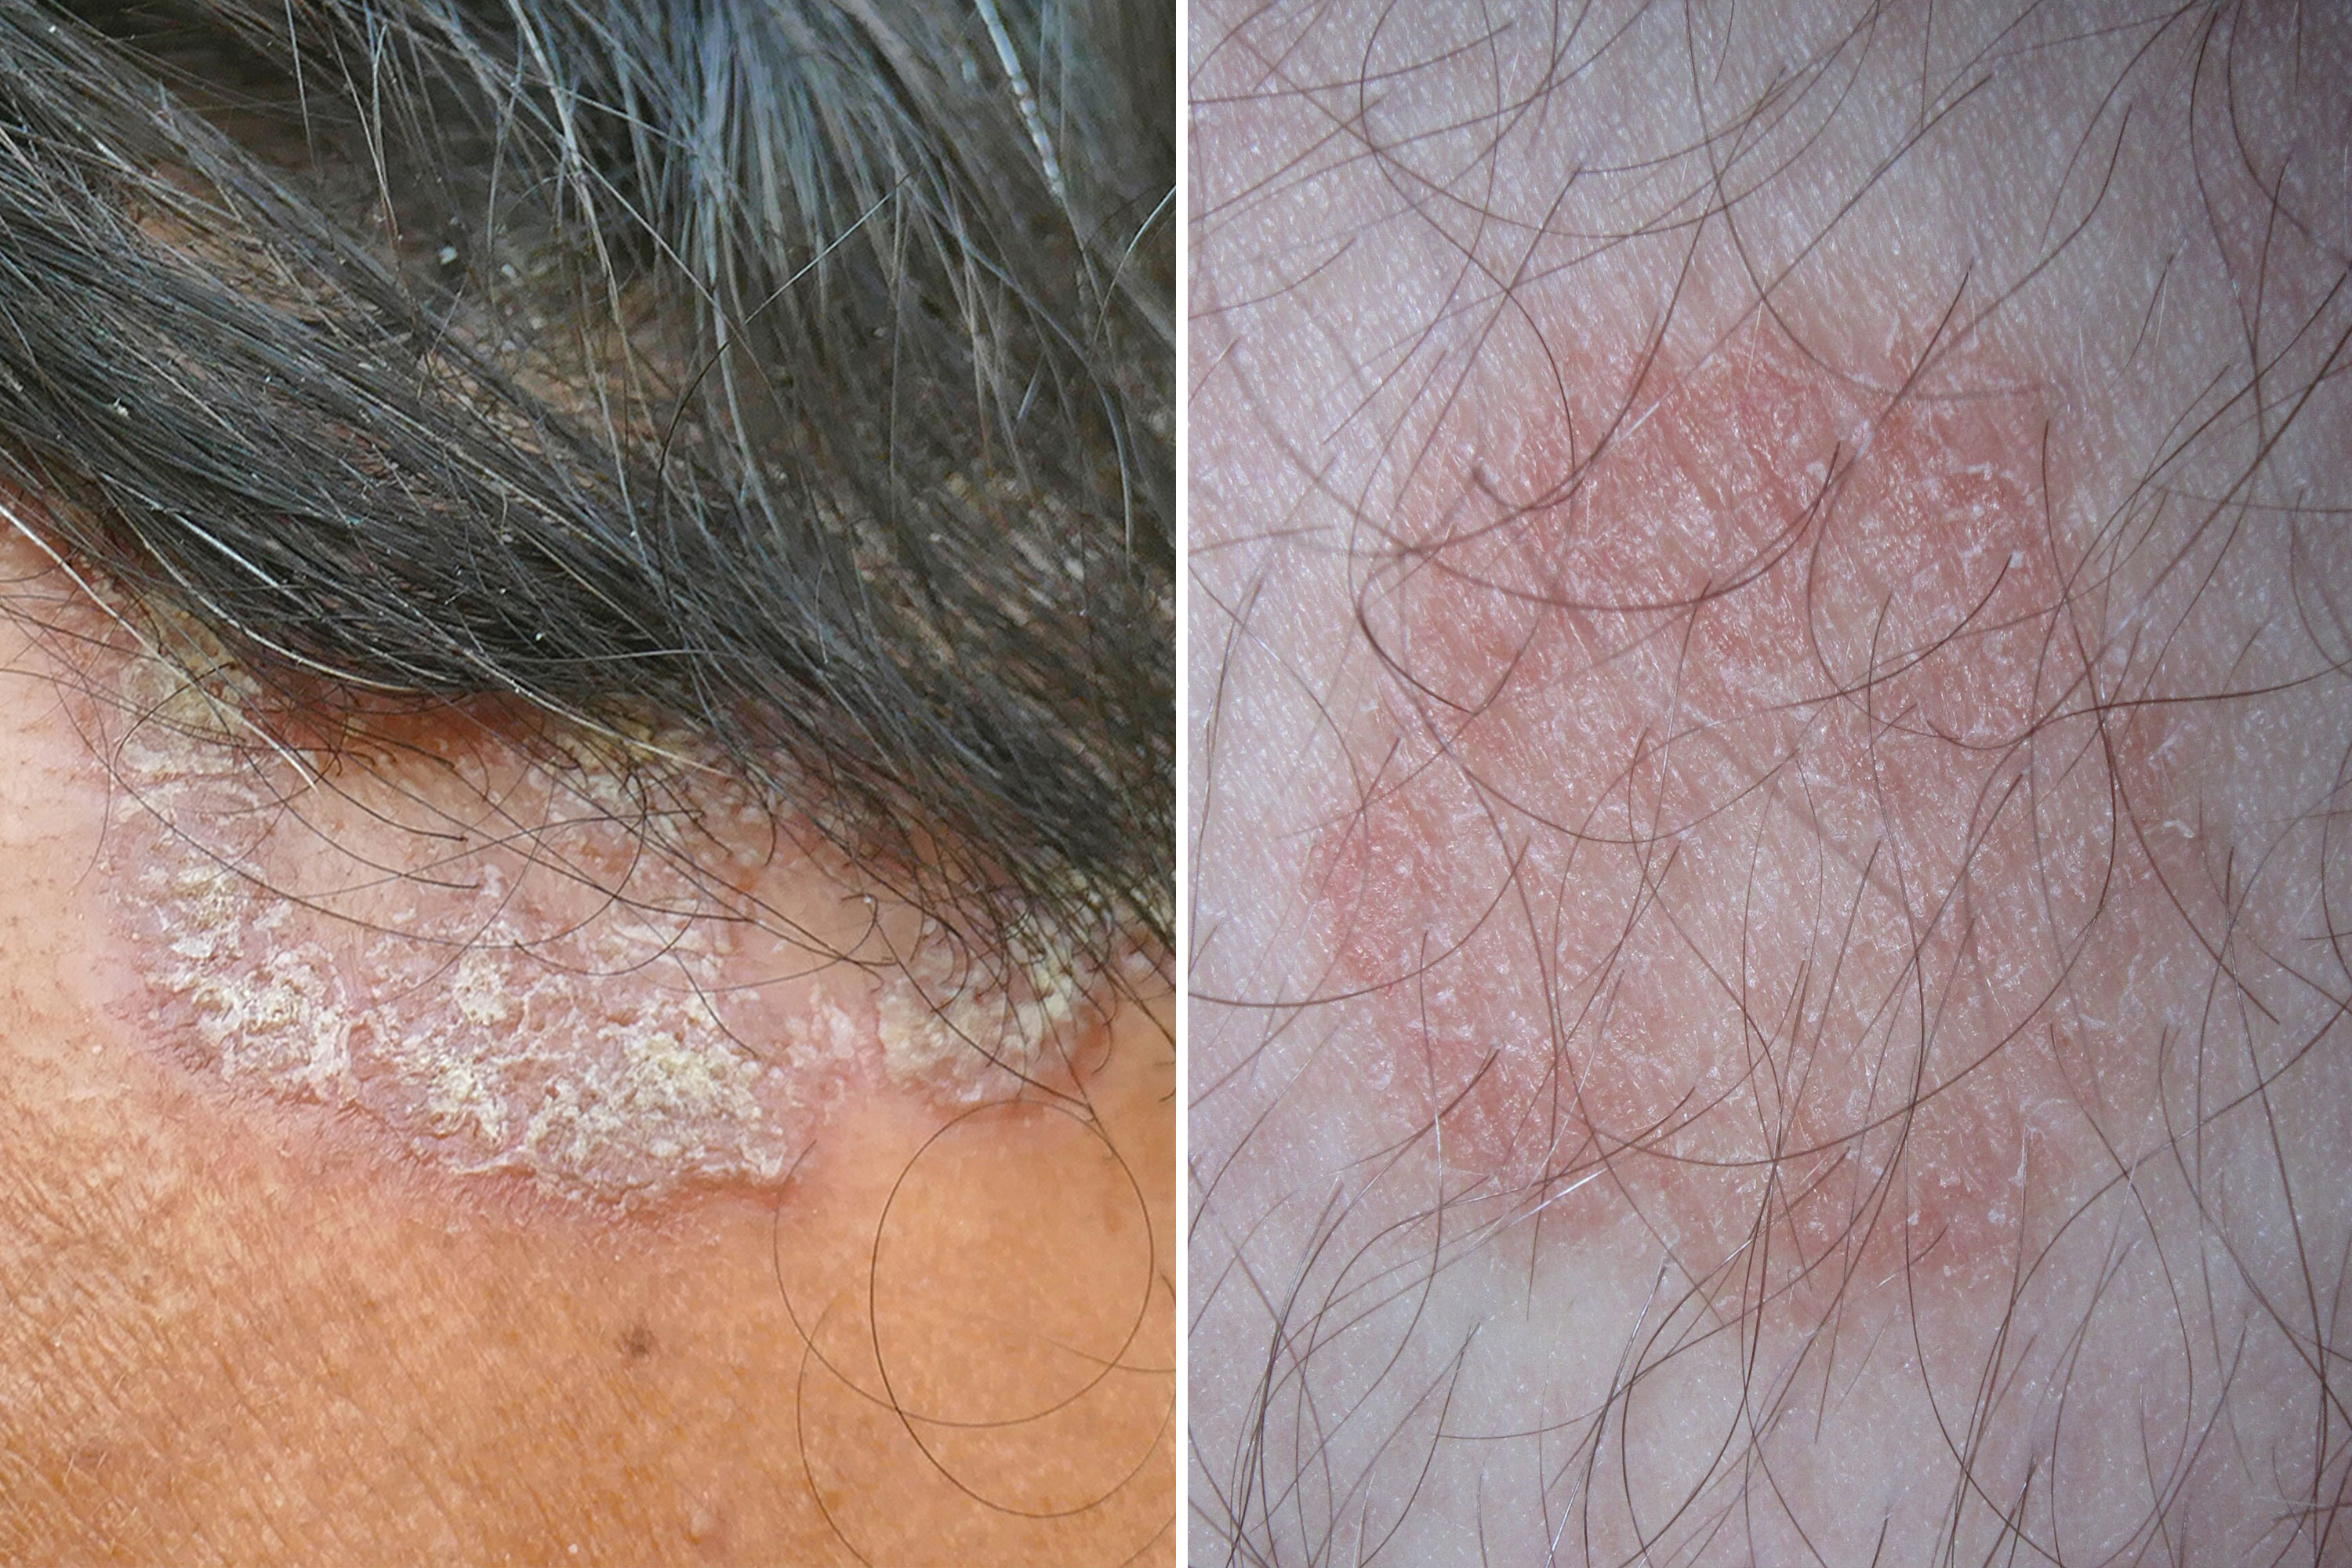 Inverse Psoriasis vs. Intertrigo: What's the Difference?